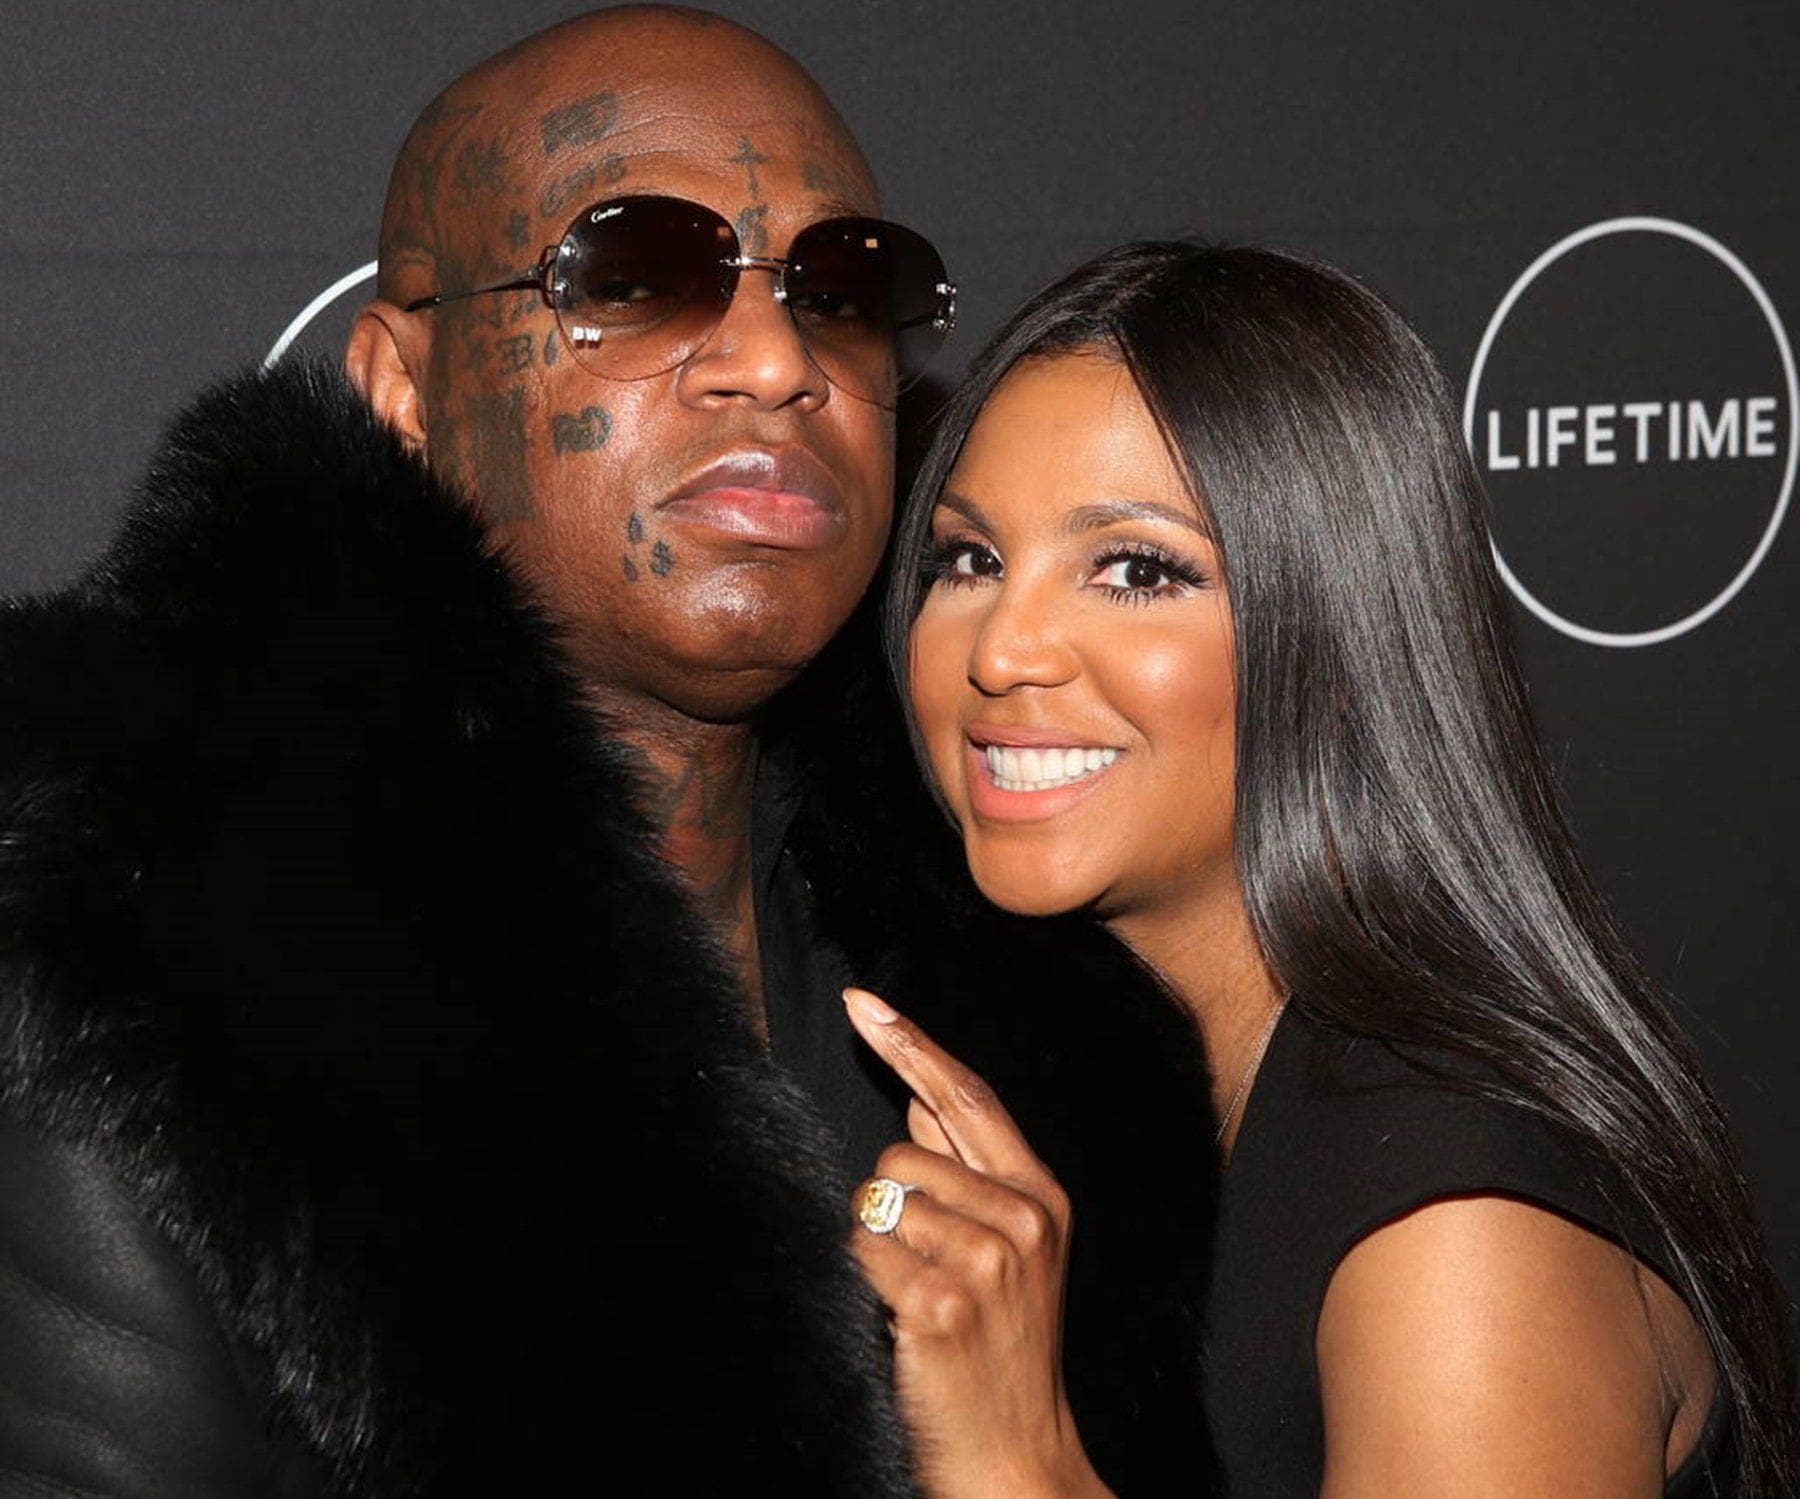 Toni Braxton Reveals She And Birdman Will Be Married This Year